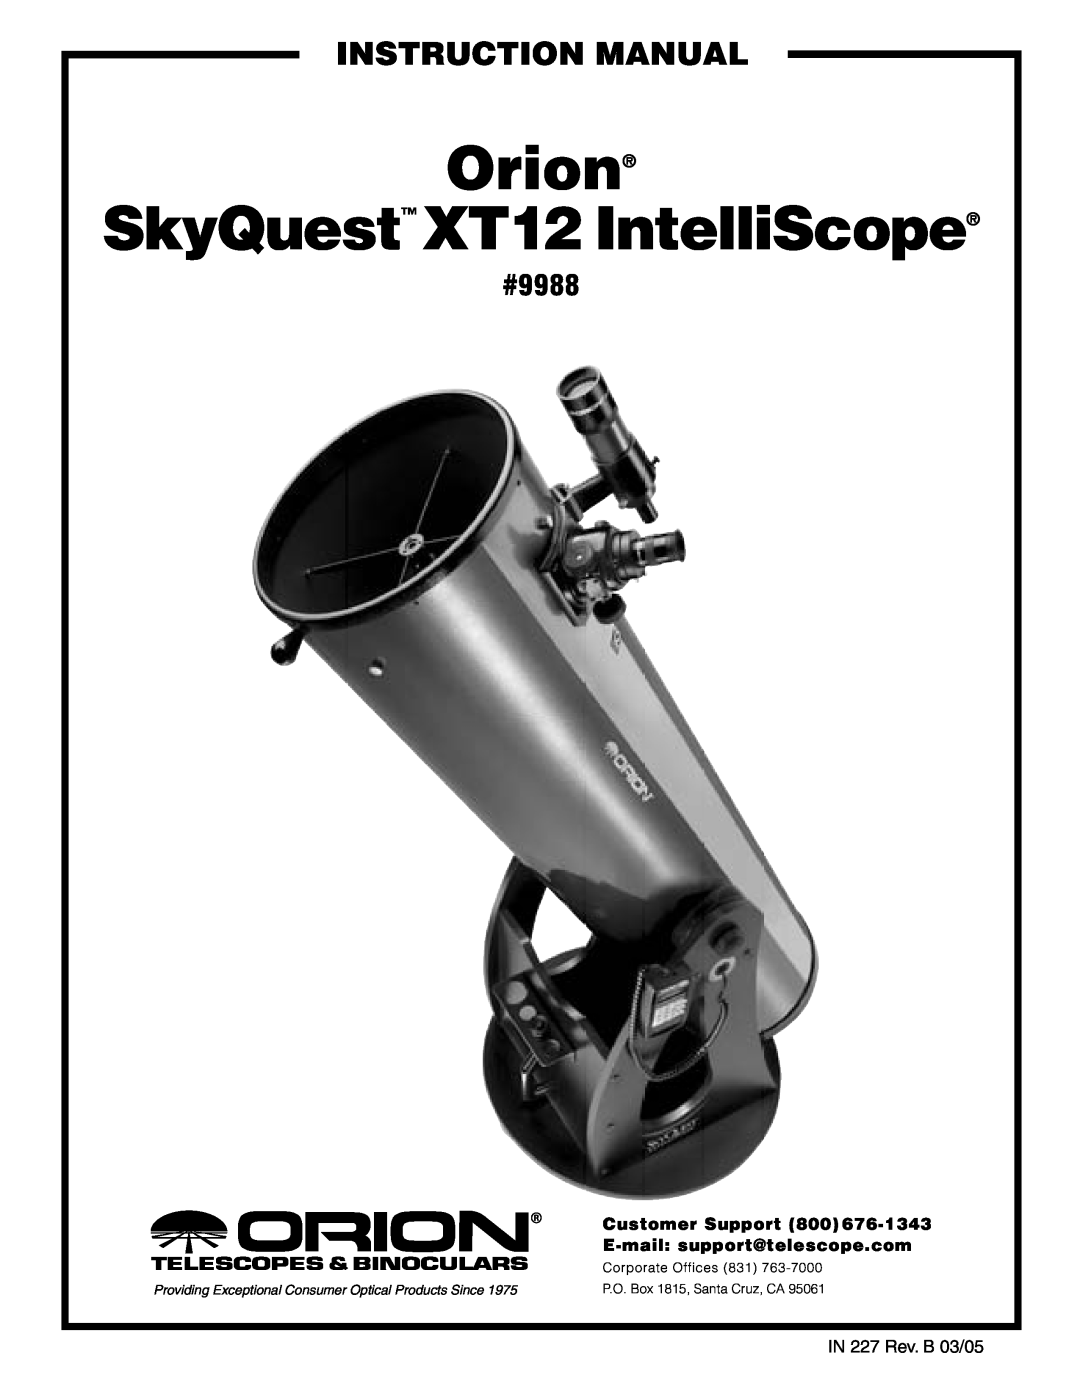 Orion instruction manual #9988, Orion SkyQuest XT12 IntelliScope, Instruction Manual, Customer Support 800 